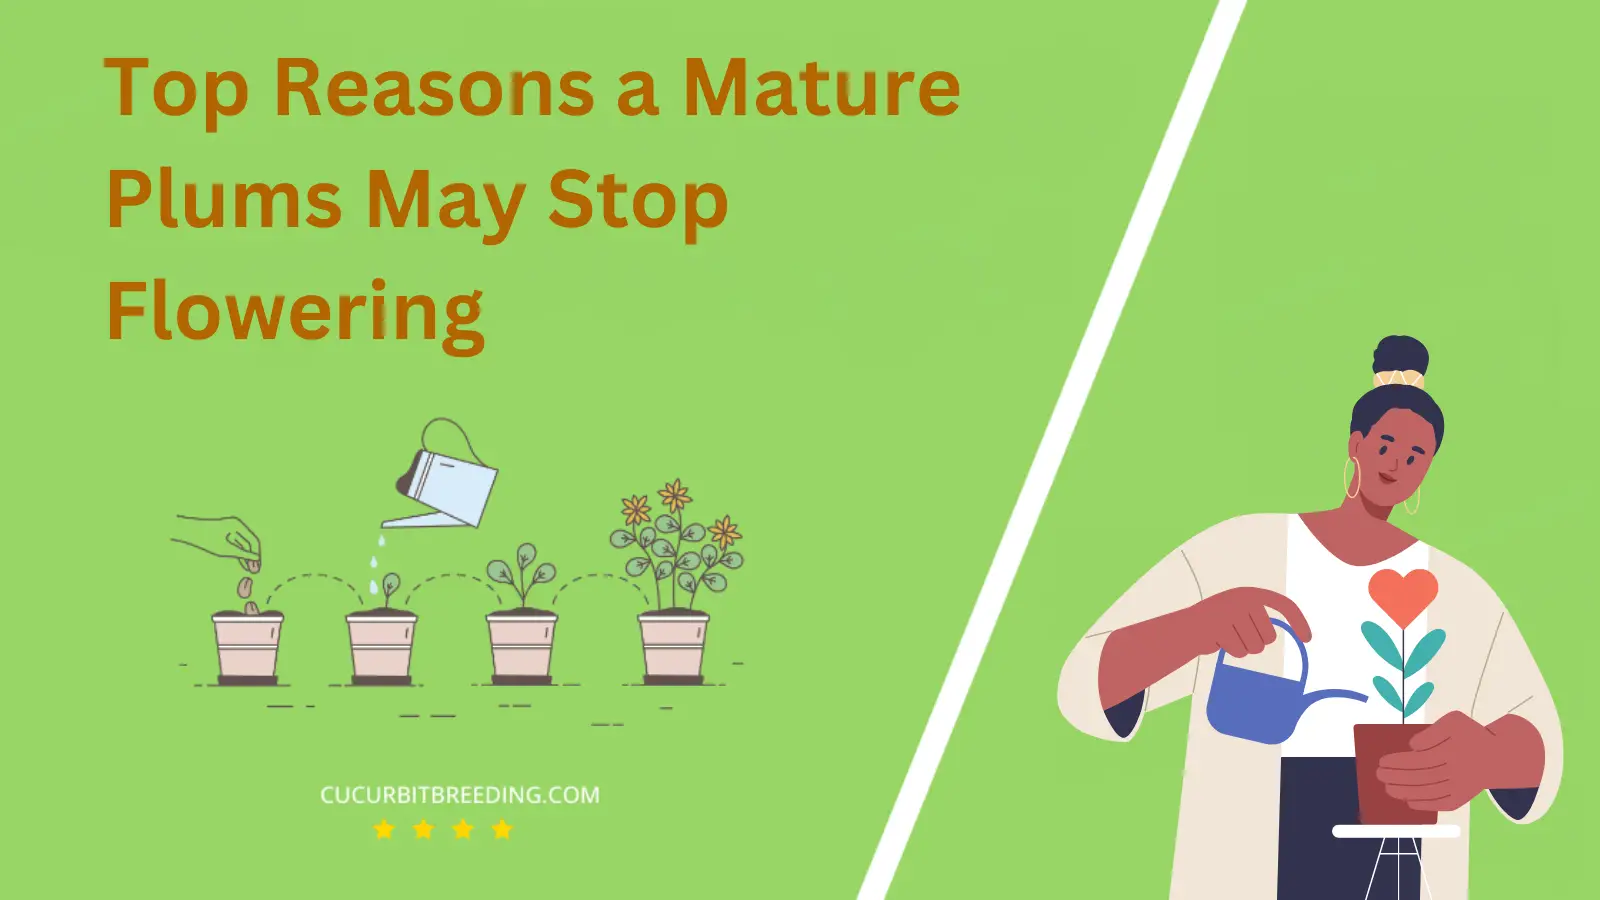 Top Reasons a Mature Plums May Stop Flowering